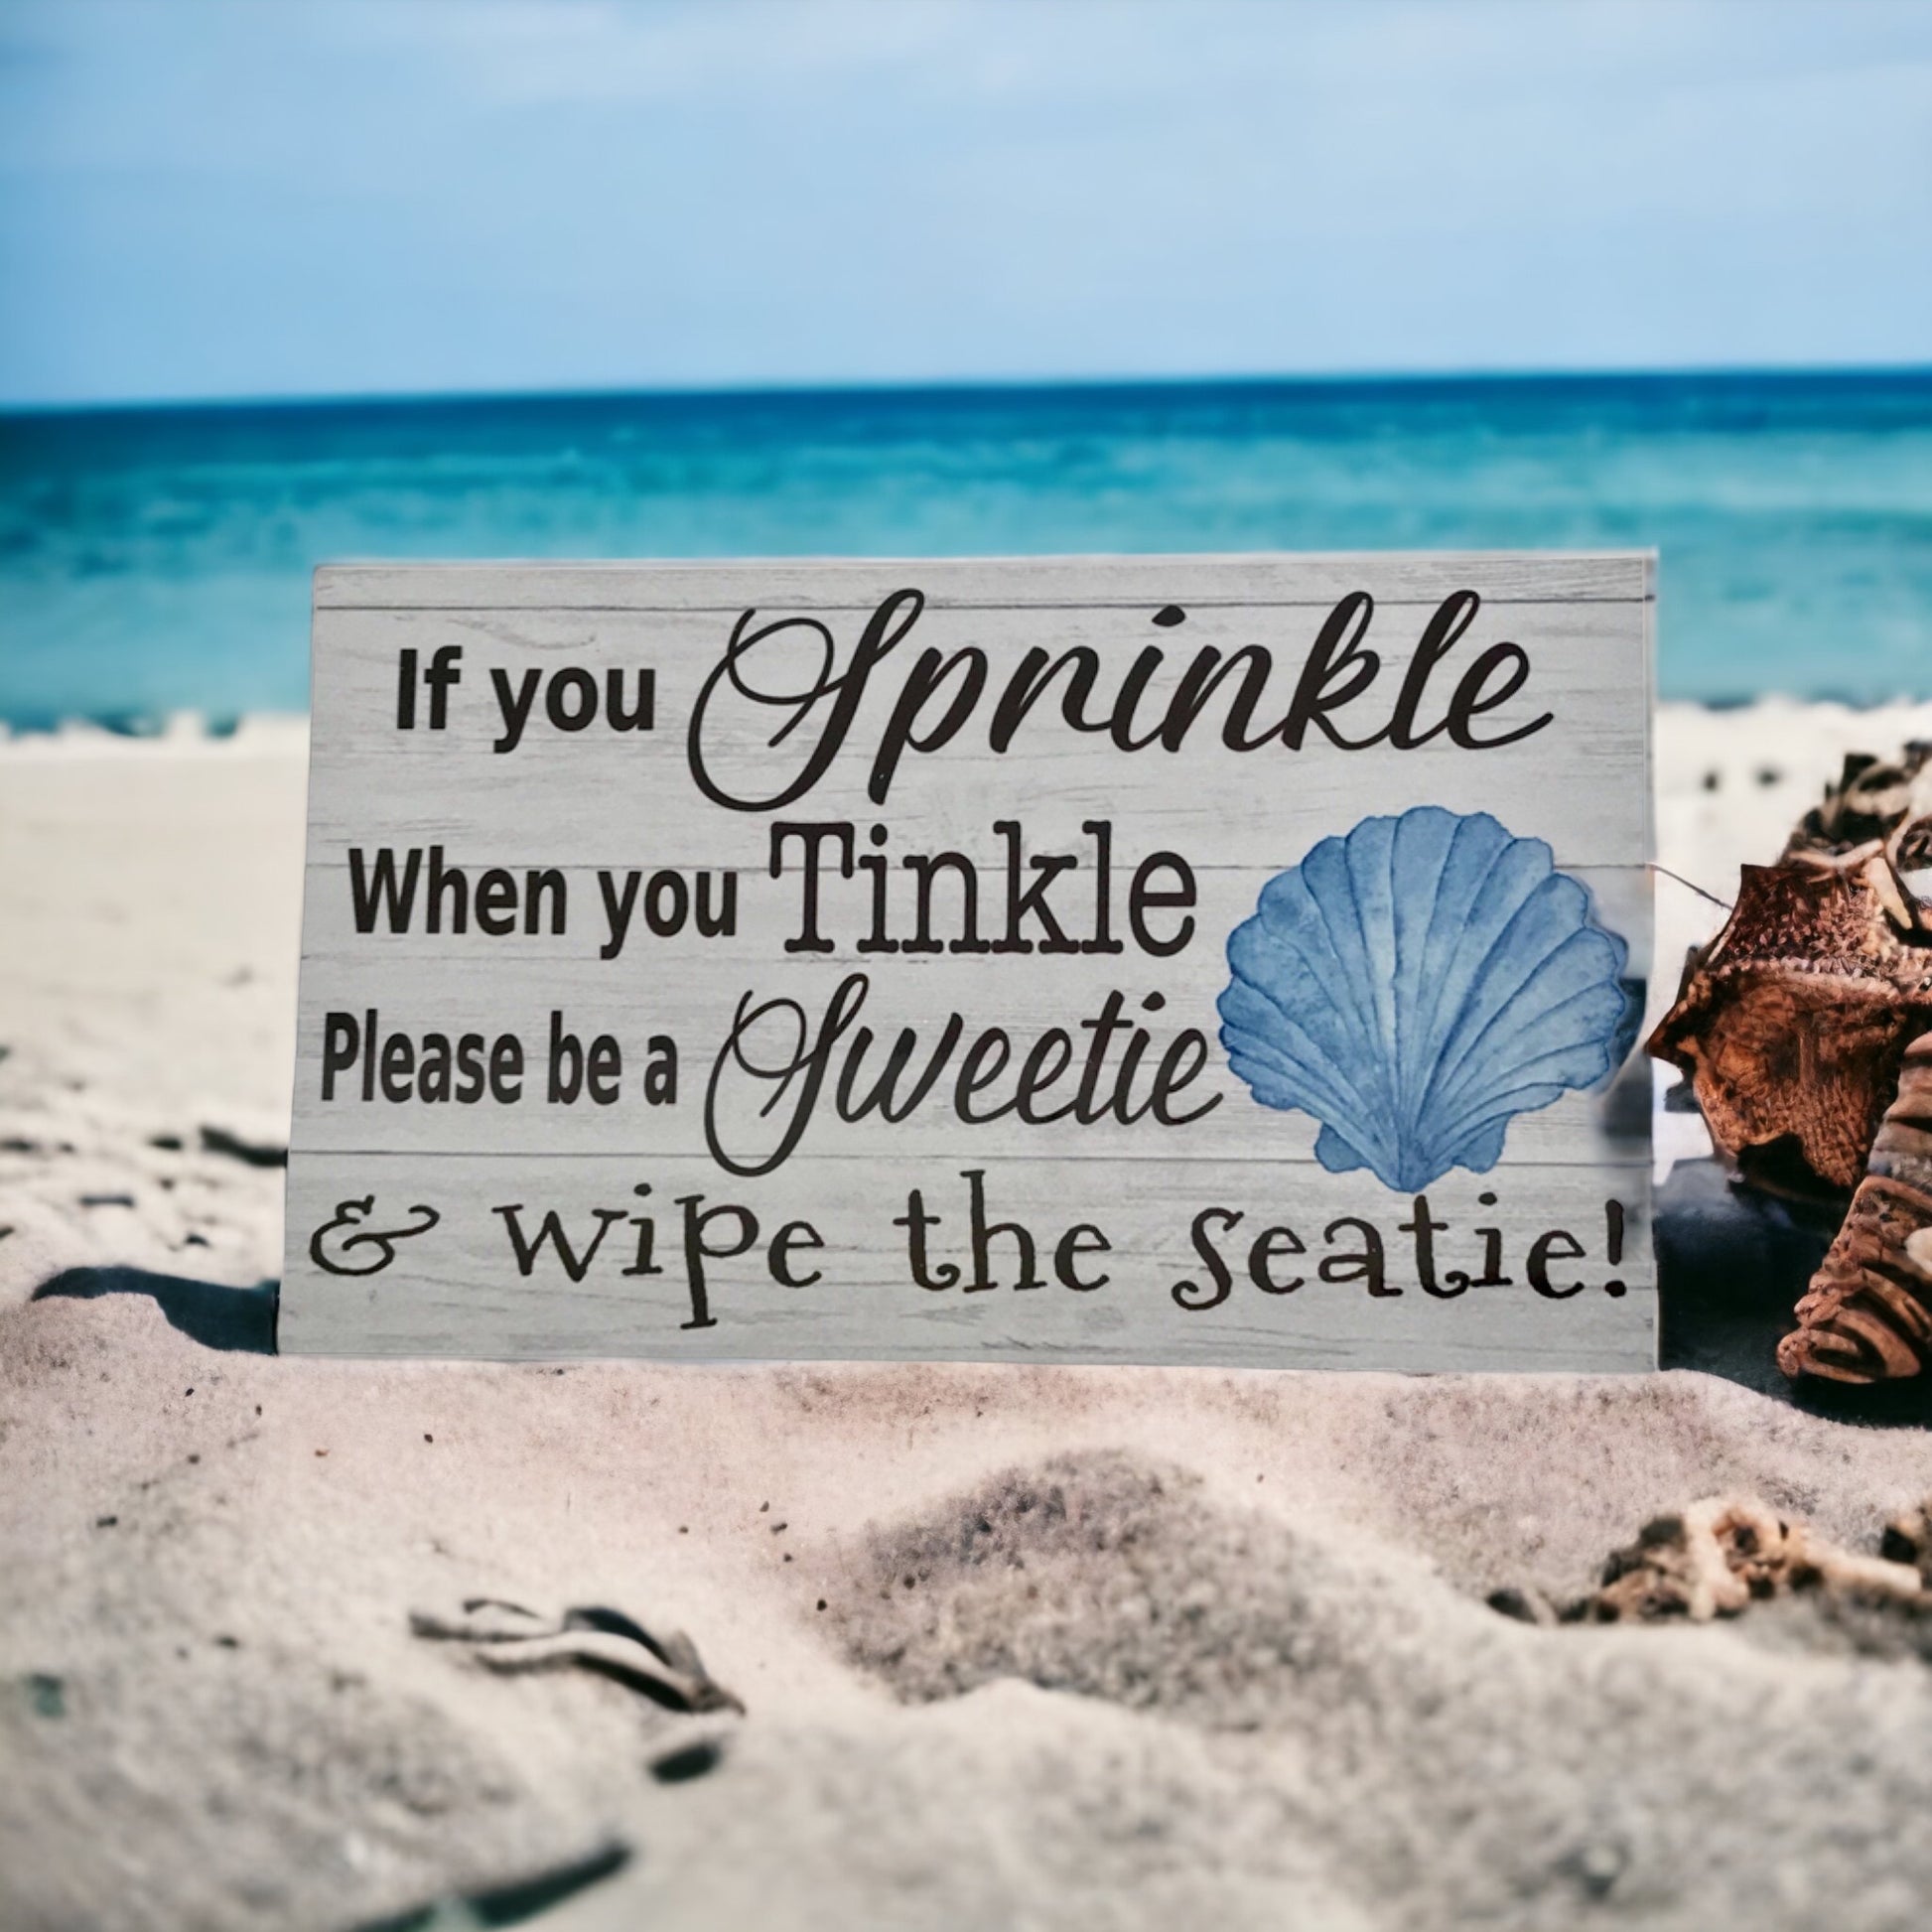 Toilet Sprinkle Tinkle Sweet Shell Beach Sign - The Renmy Store Homewares & Gifts 